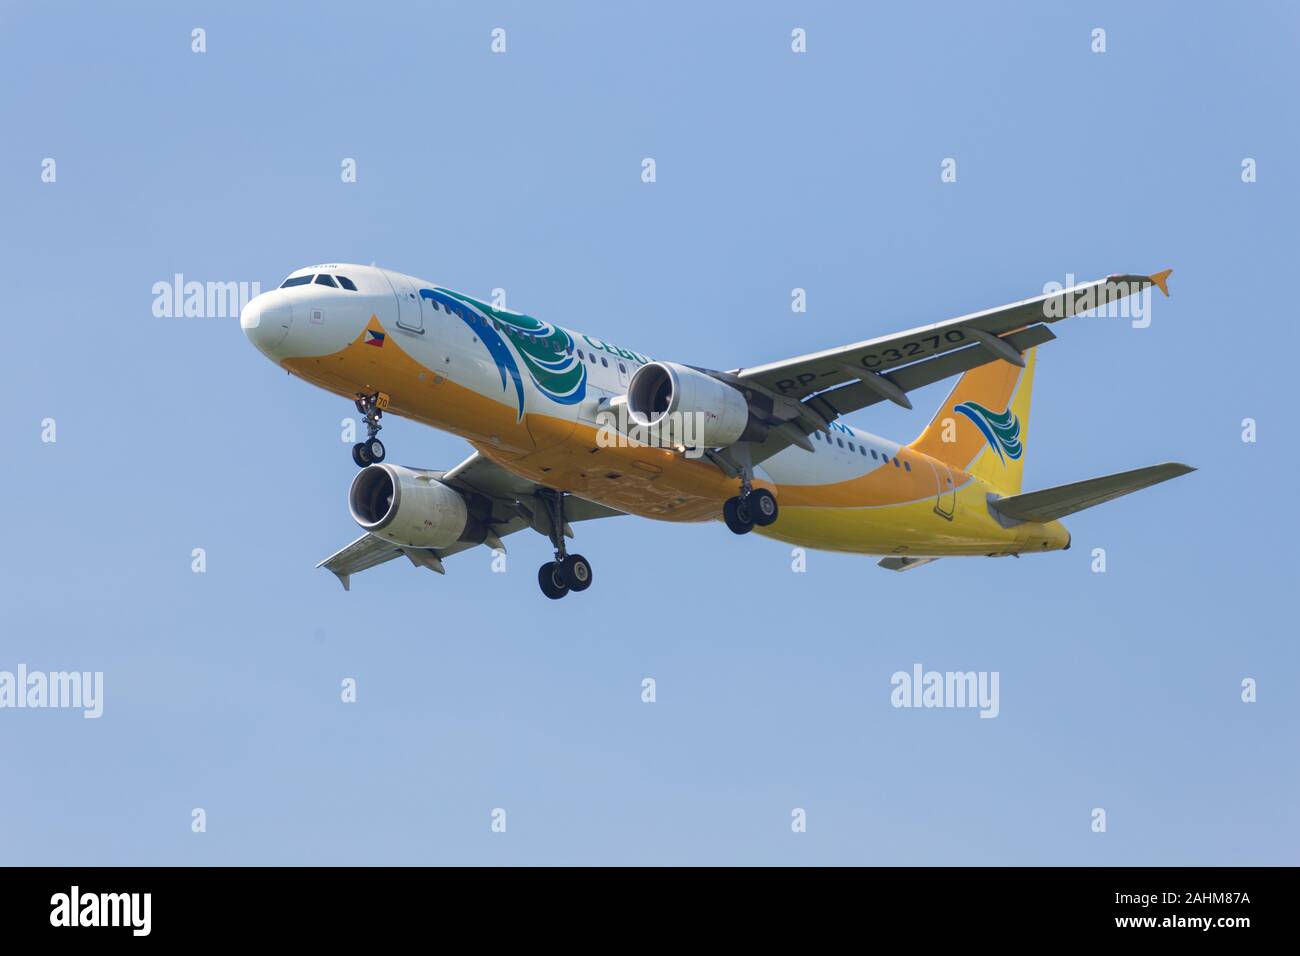 Pasay, Philippines - August 10, 2017: Cebu Pacific airbus a320 in finals for landing at Ninoy Aquino International Airport Stock Photo